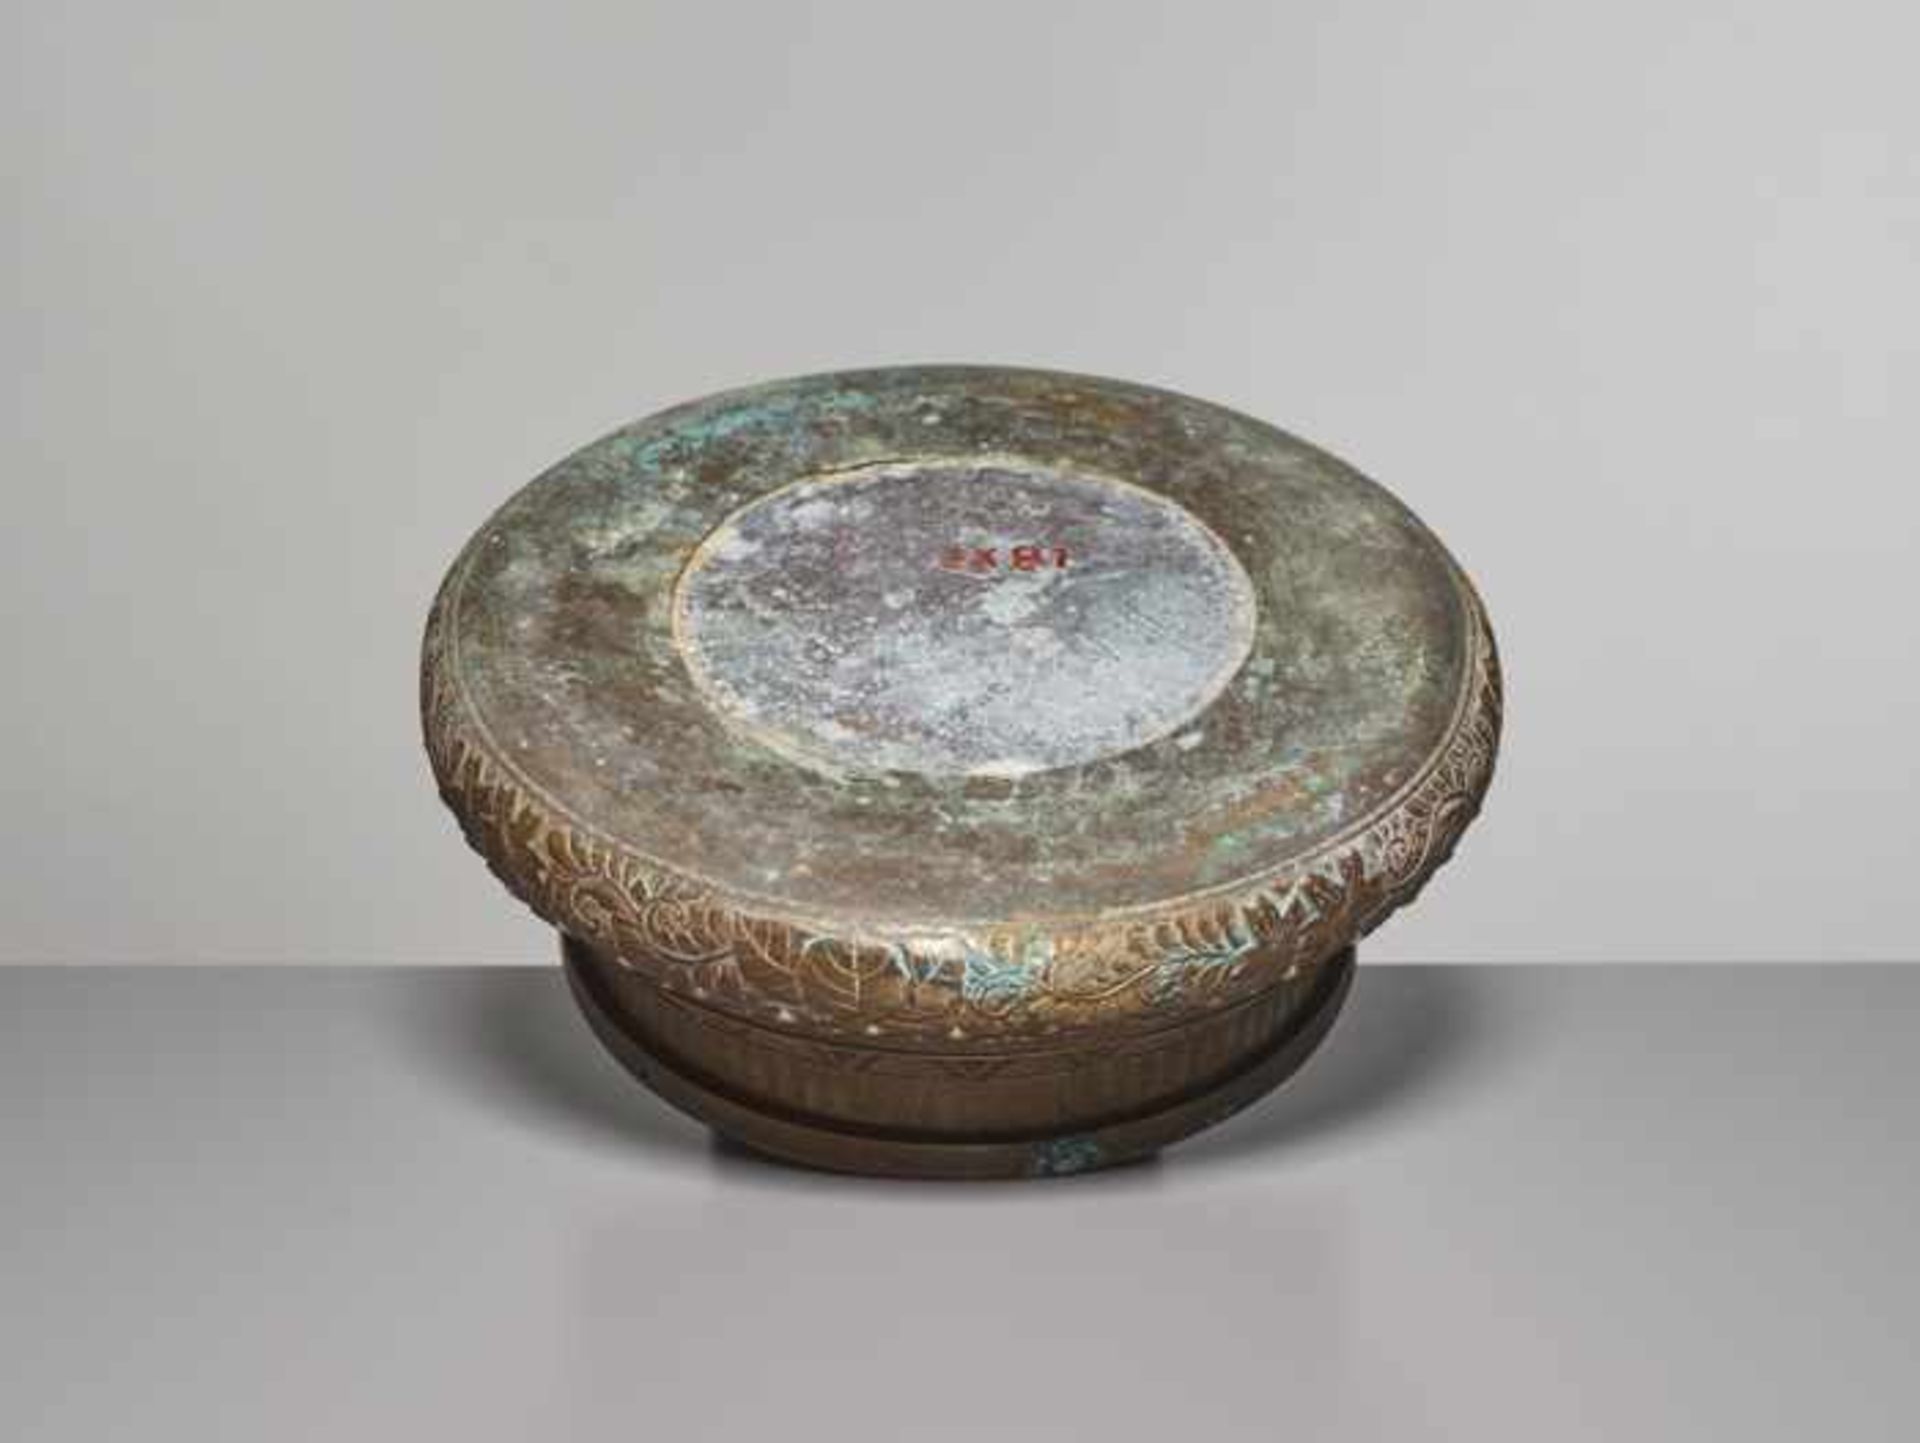 AN ENGRAVED BRONZE BASIN, QING DYNASTY Cast of massive and heavy bronze, with neatly incised - Image 3 of 6